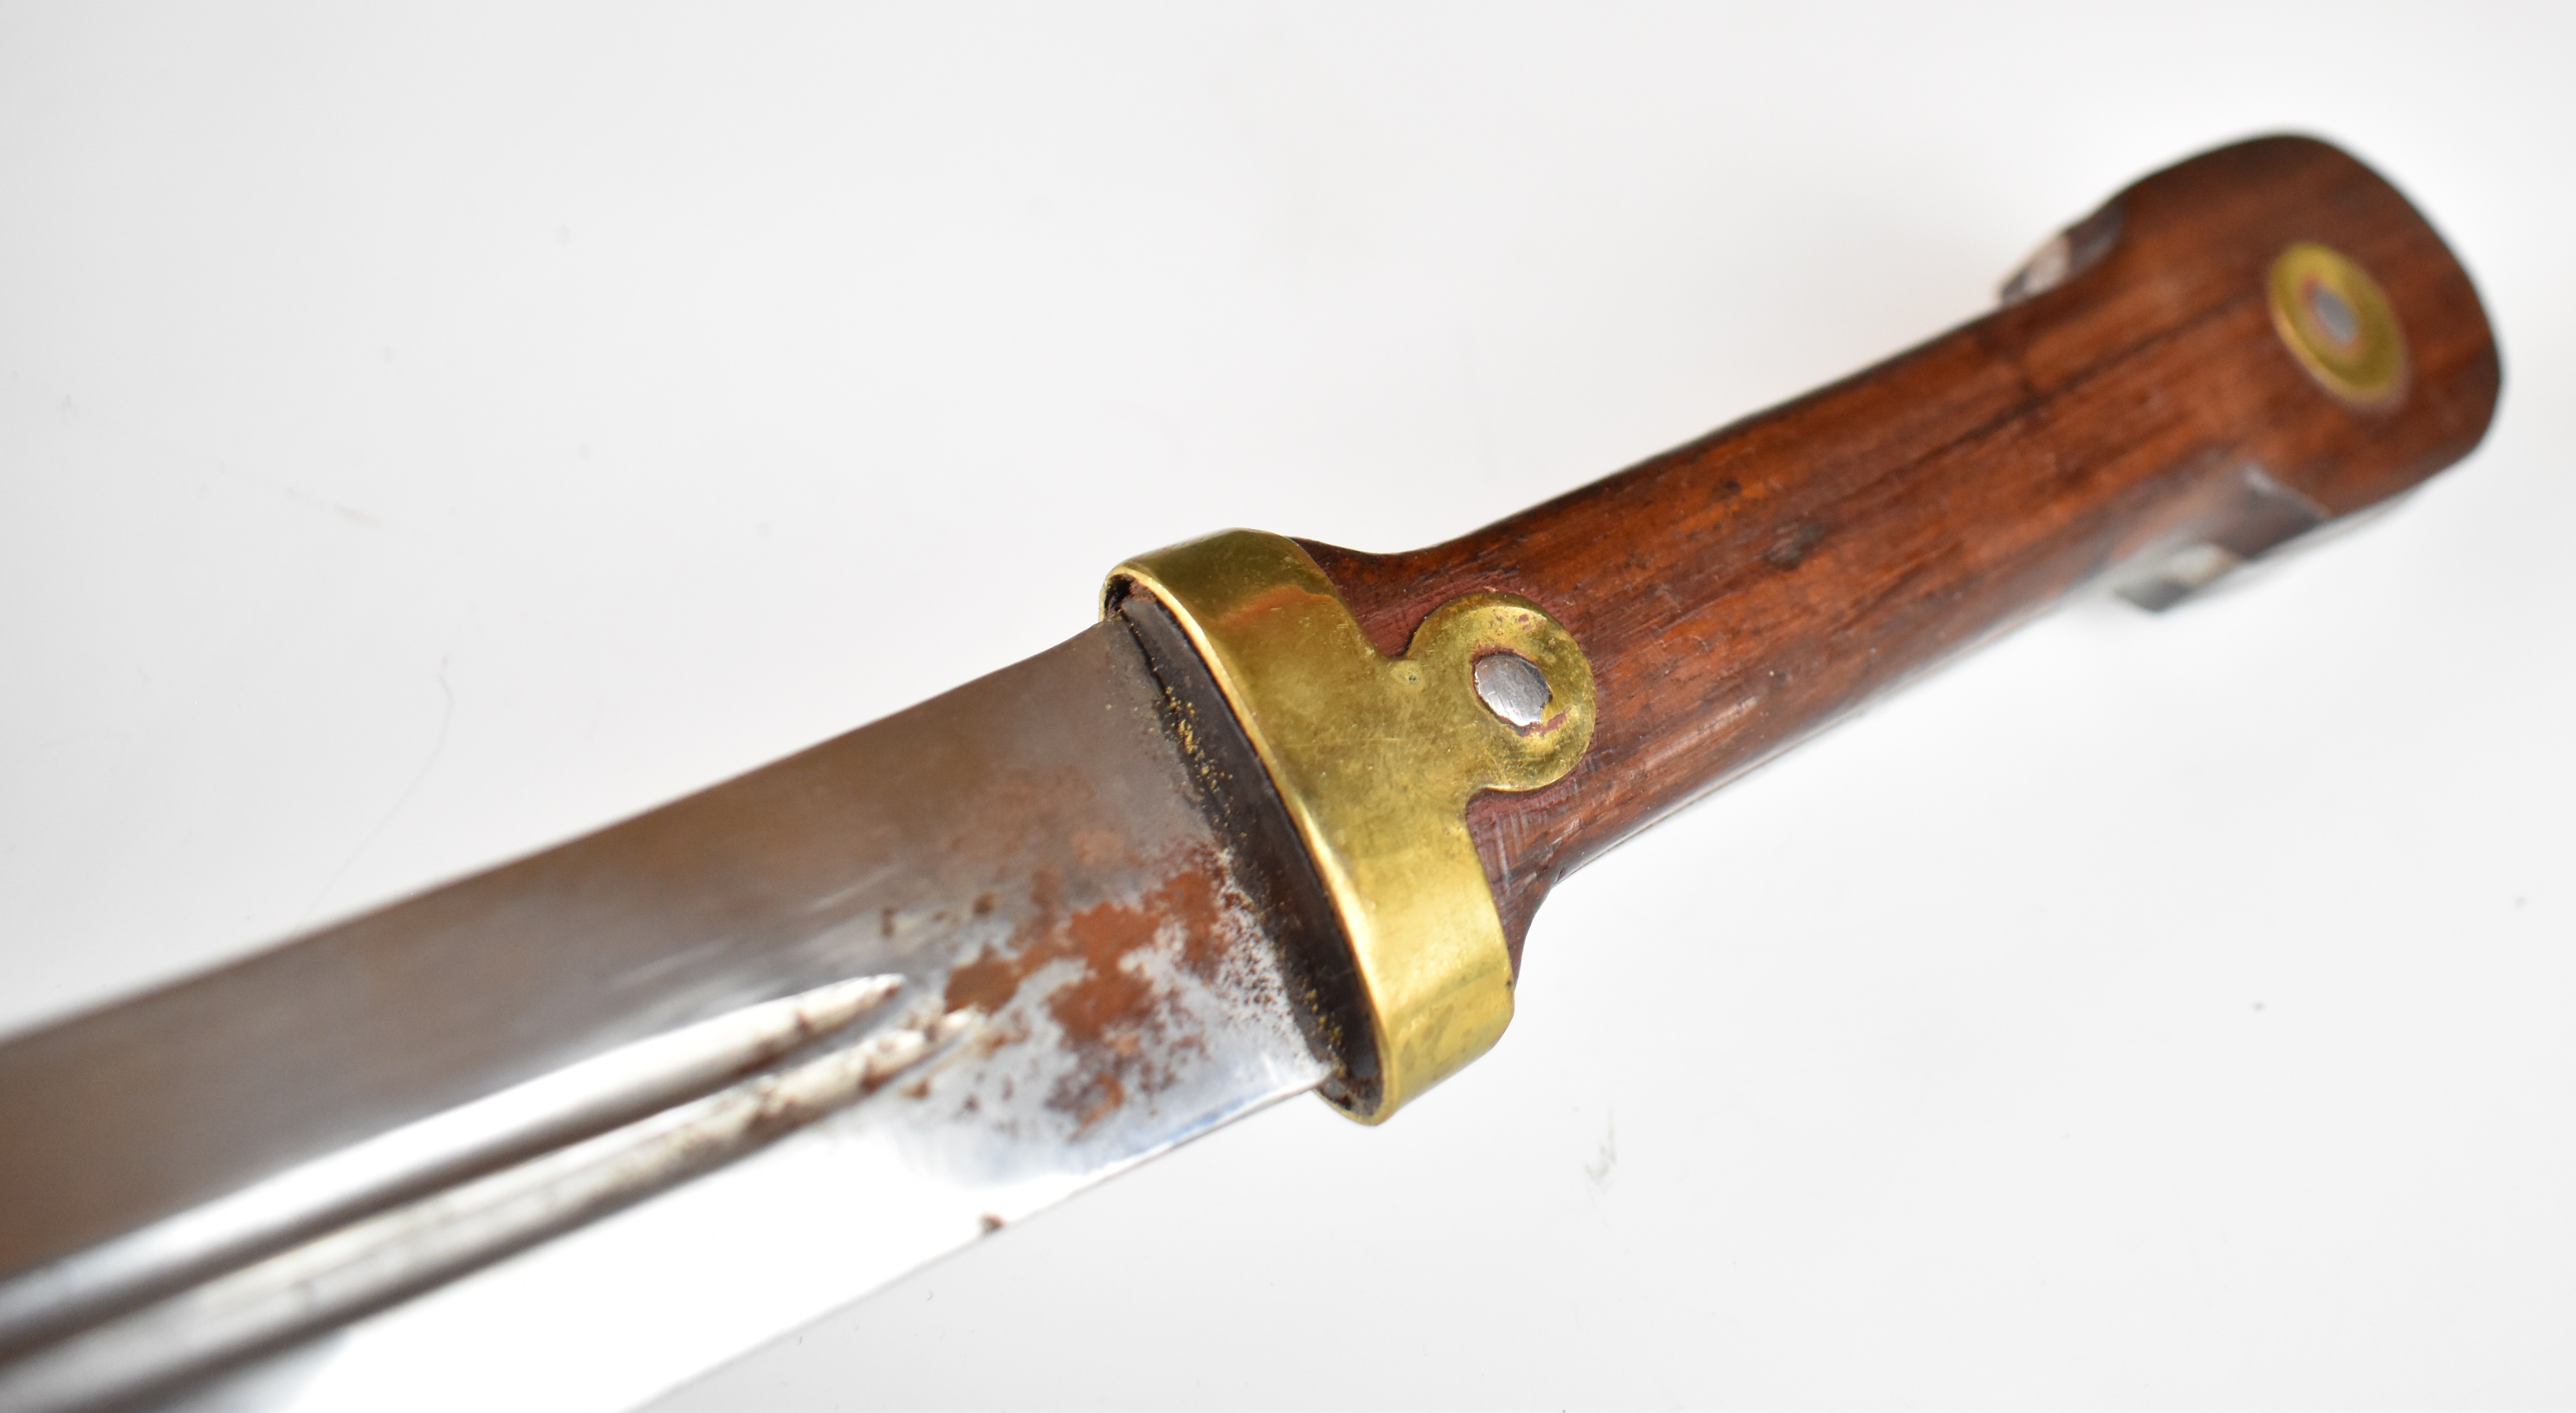 Continental short sword with wooden grips, 44cm double fullered curved blade, leather covered sheath - Image 4 of 6